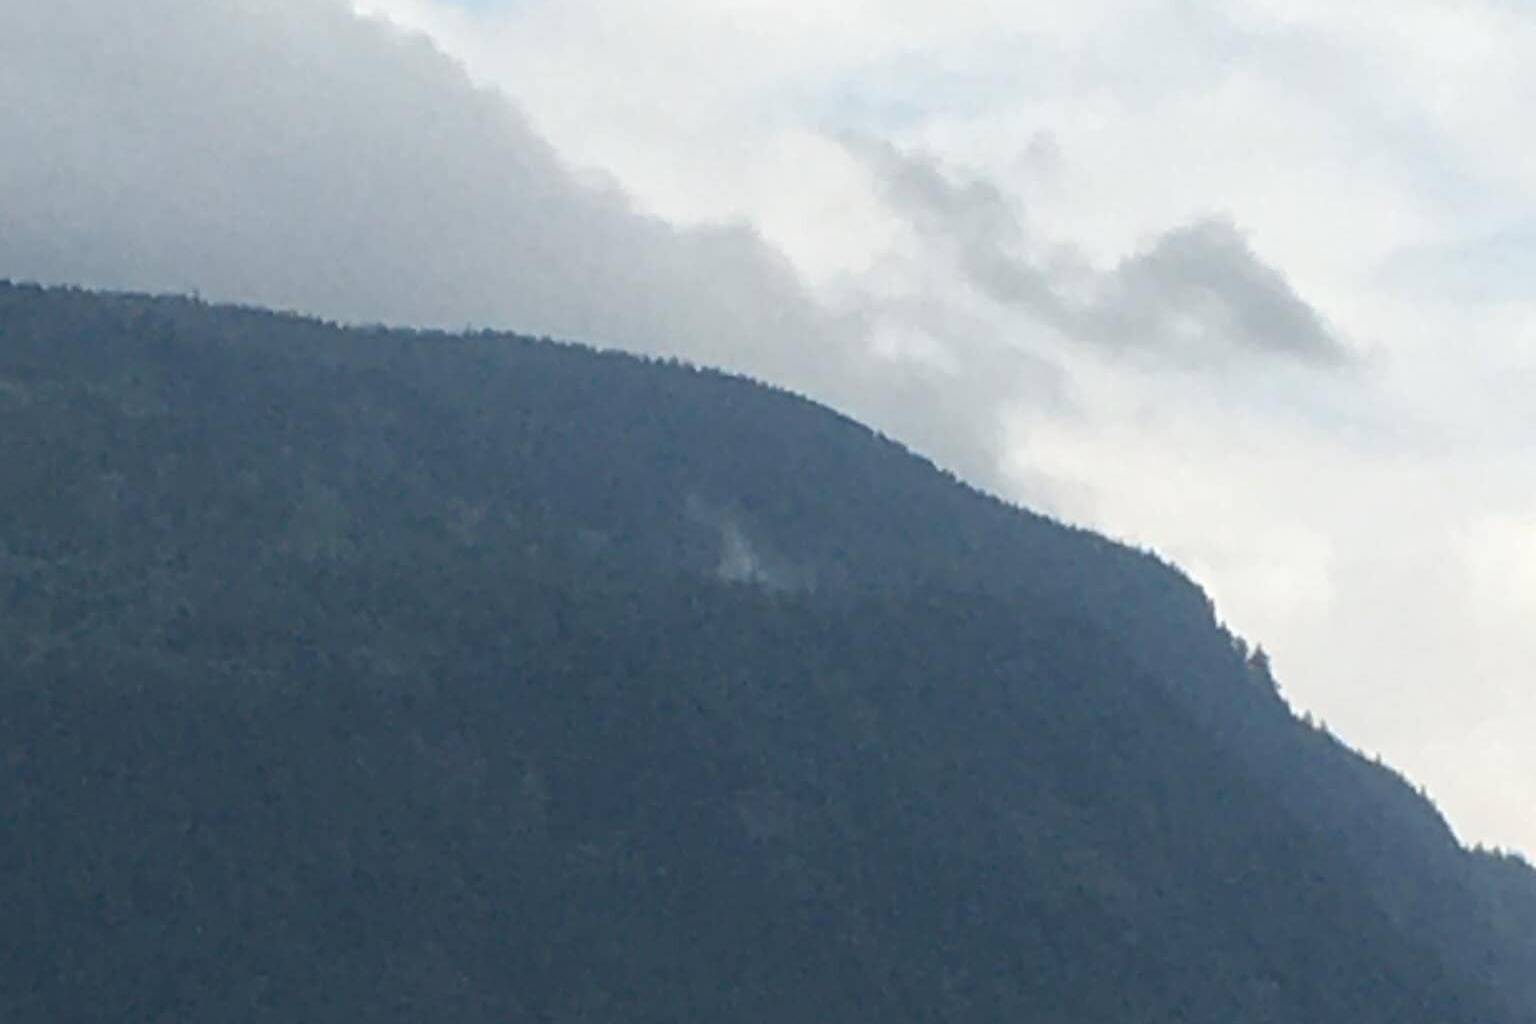 A wisp of smoke comes off of Bear Mountain near Harrison Hot Springs. This was one of a handful of wildfires that started early this week when thunderstorms rolled through the Fraser Valley. While the Bear Mountain fire is out of control, there are no open flames at this time. (Photo/Michelle Sharma)